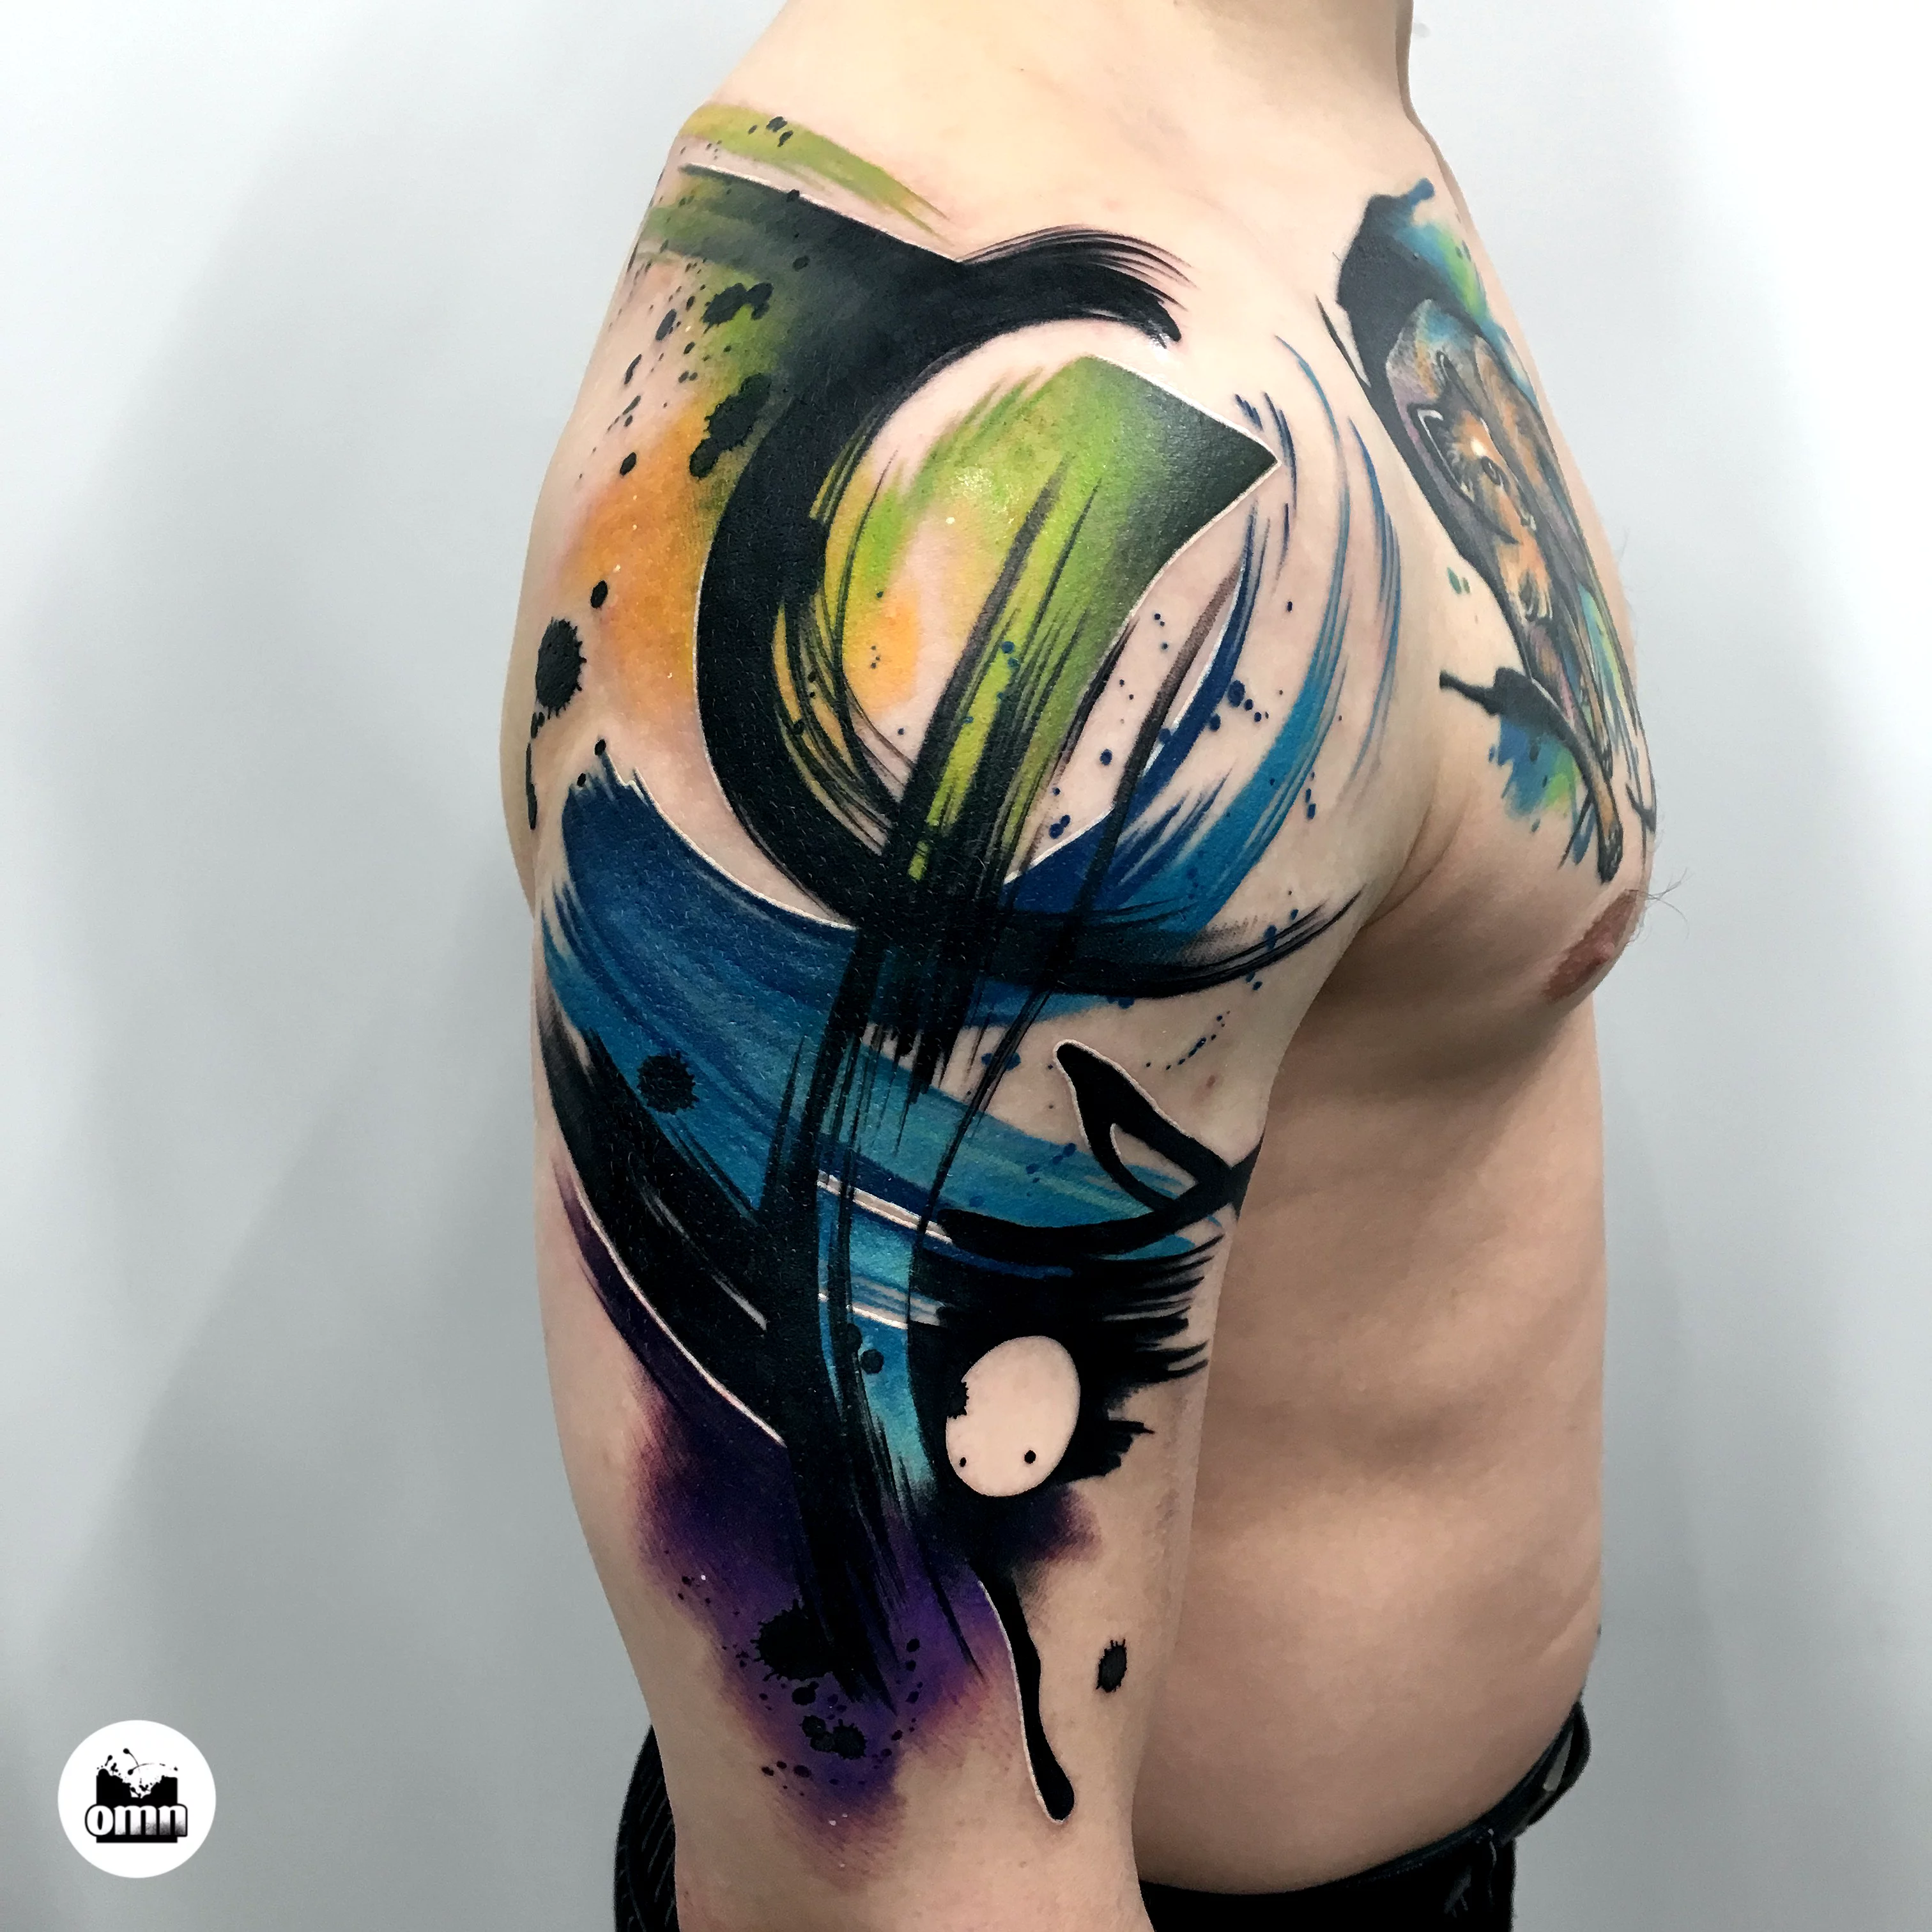 The Cool-Color Abstract Painting Tattoo Ideas